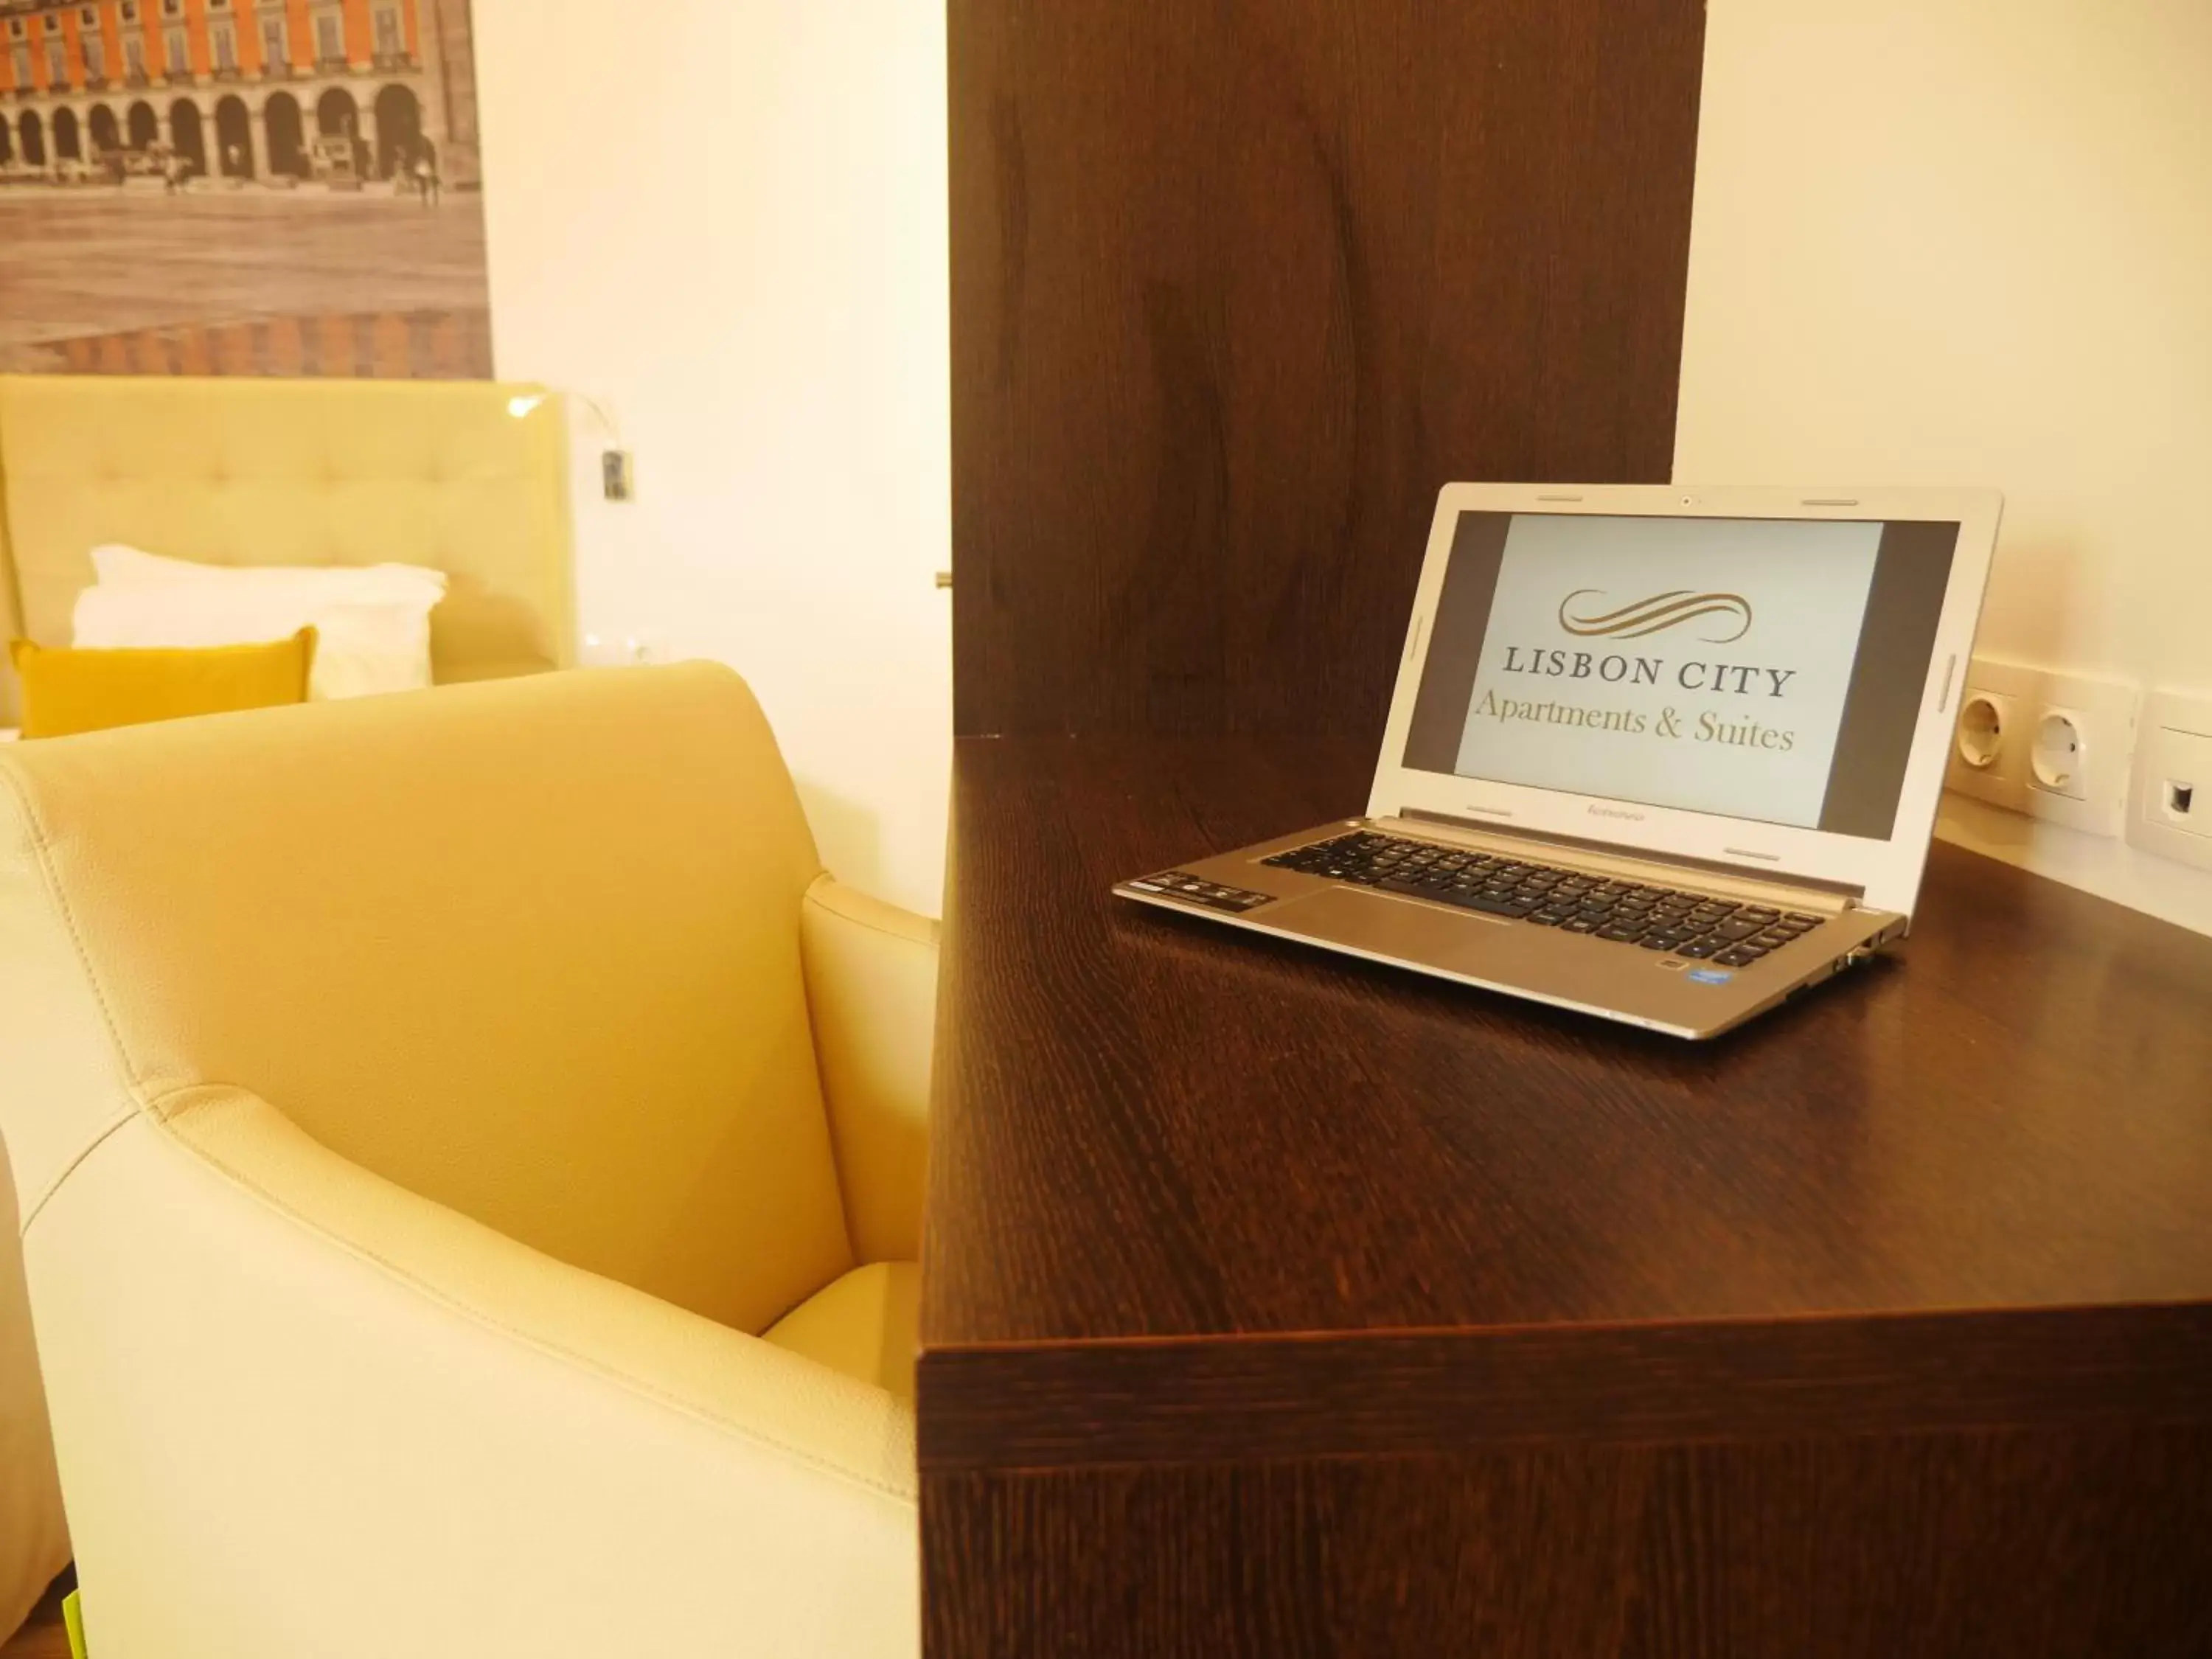 Business facilities in Lisbon City Apartments & Suites by City Hotels